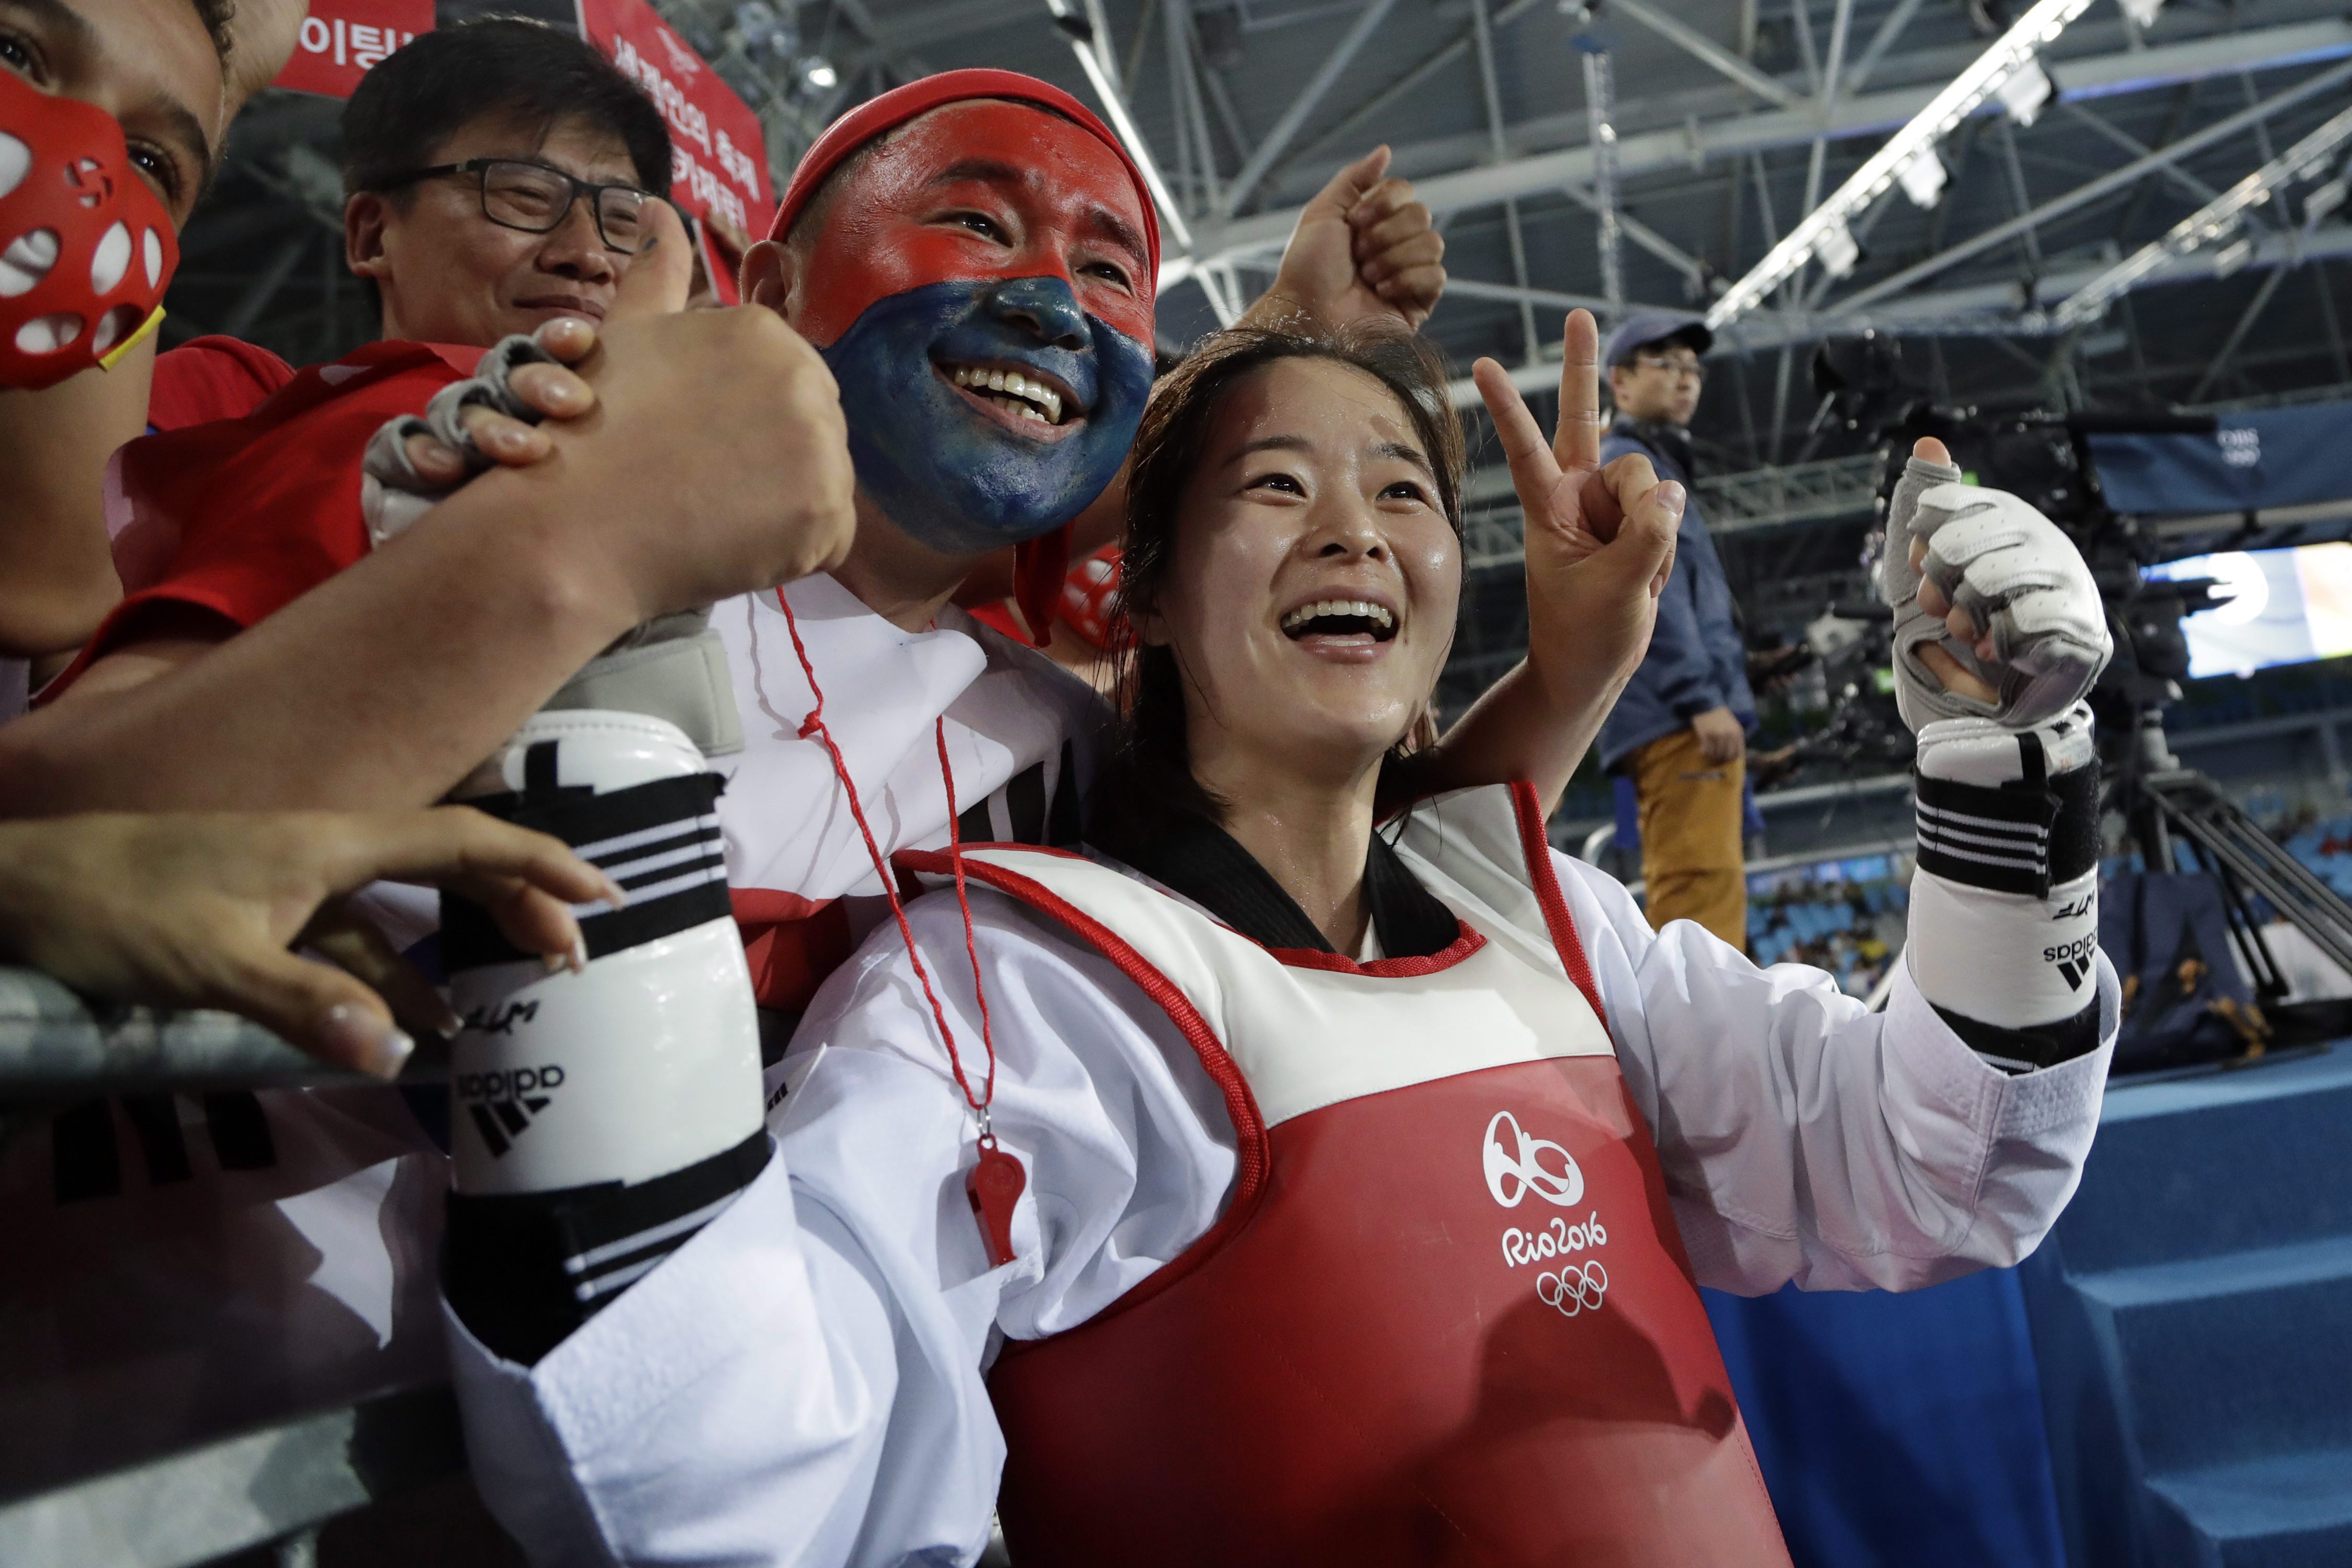 Oh Hye-ri of South Korea celebrates with fans after winning the gold medal in the women's 67 kg taekwondo competition at the 2016 Summer Olympics in Rio de Janeiro, Brazil, Friday, Aug. 19, 2016. (AP Photo/Gregory Bull)